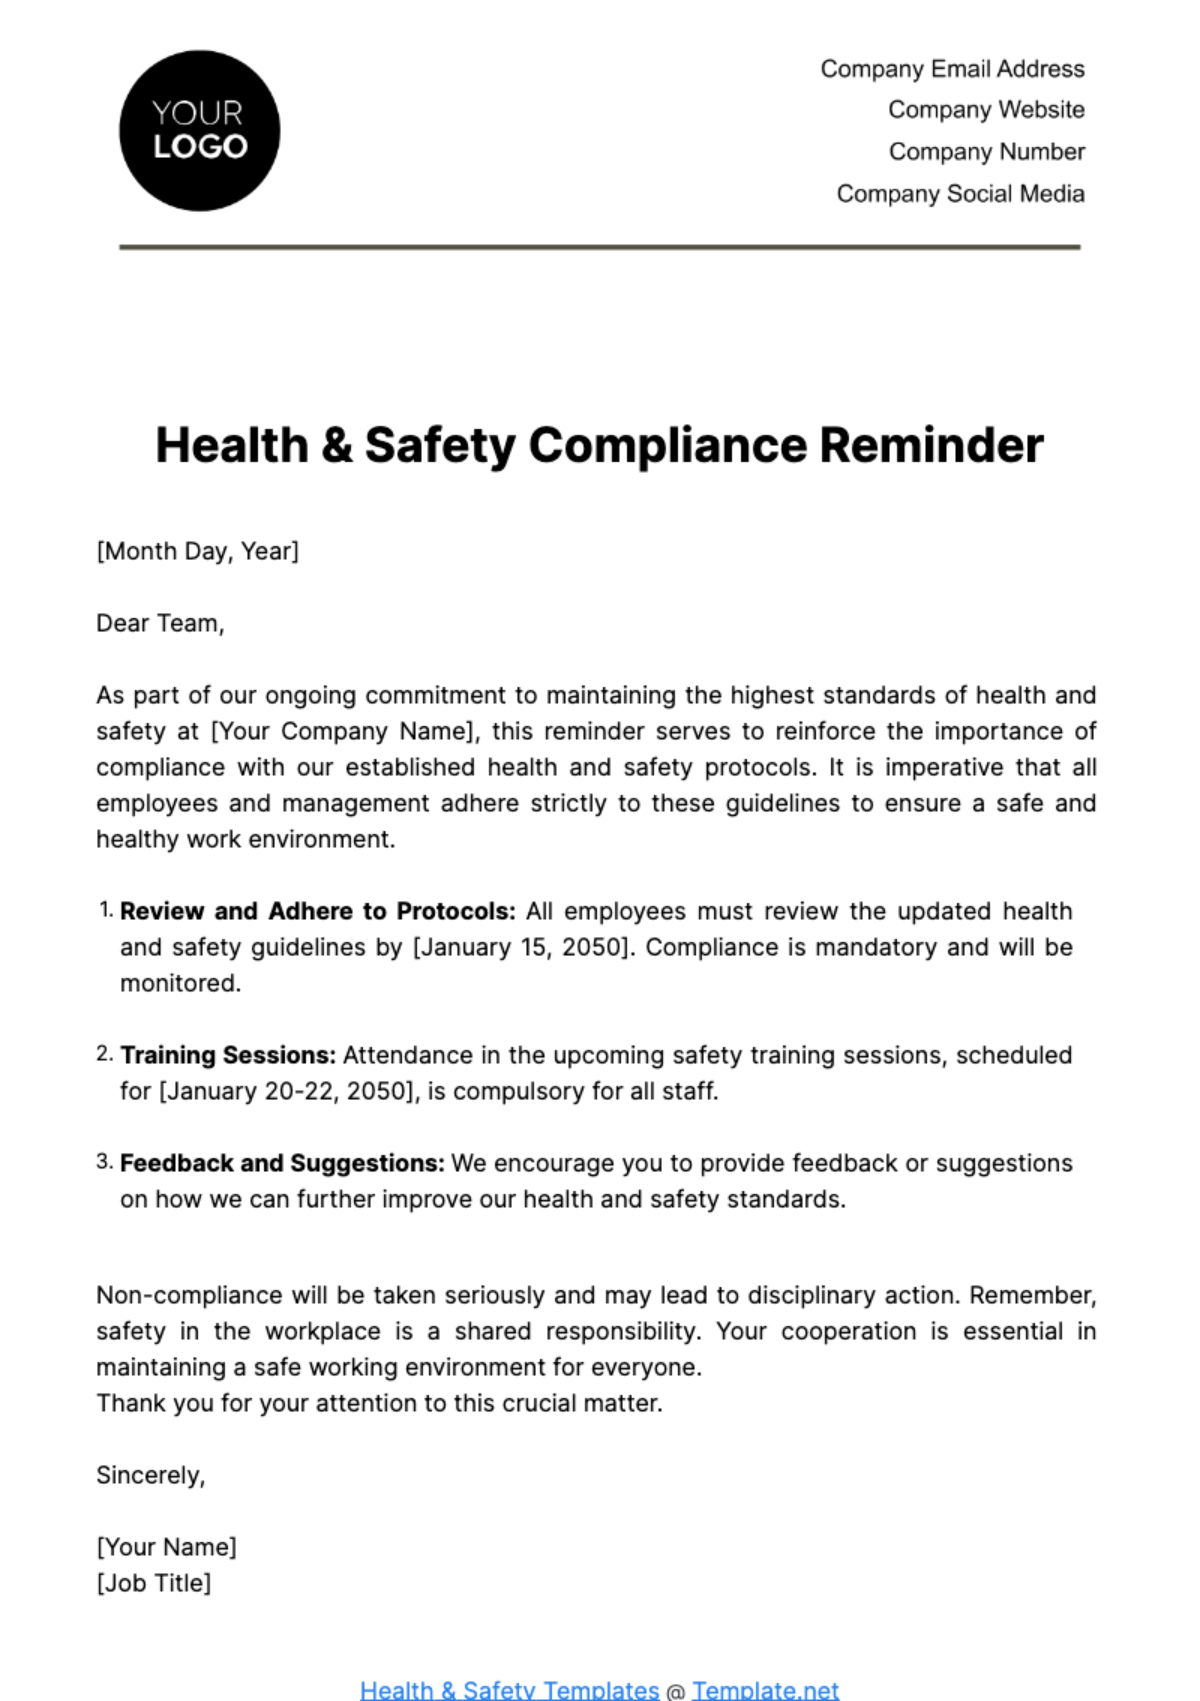 Health & Safety Compliance Reminder Template